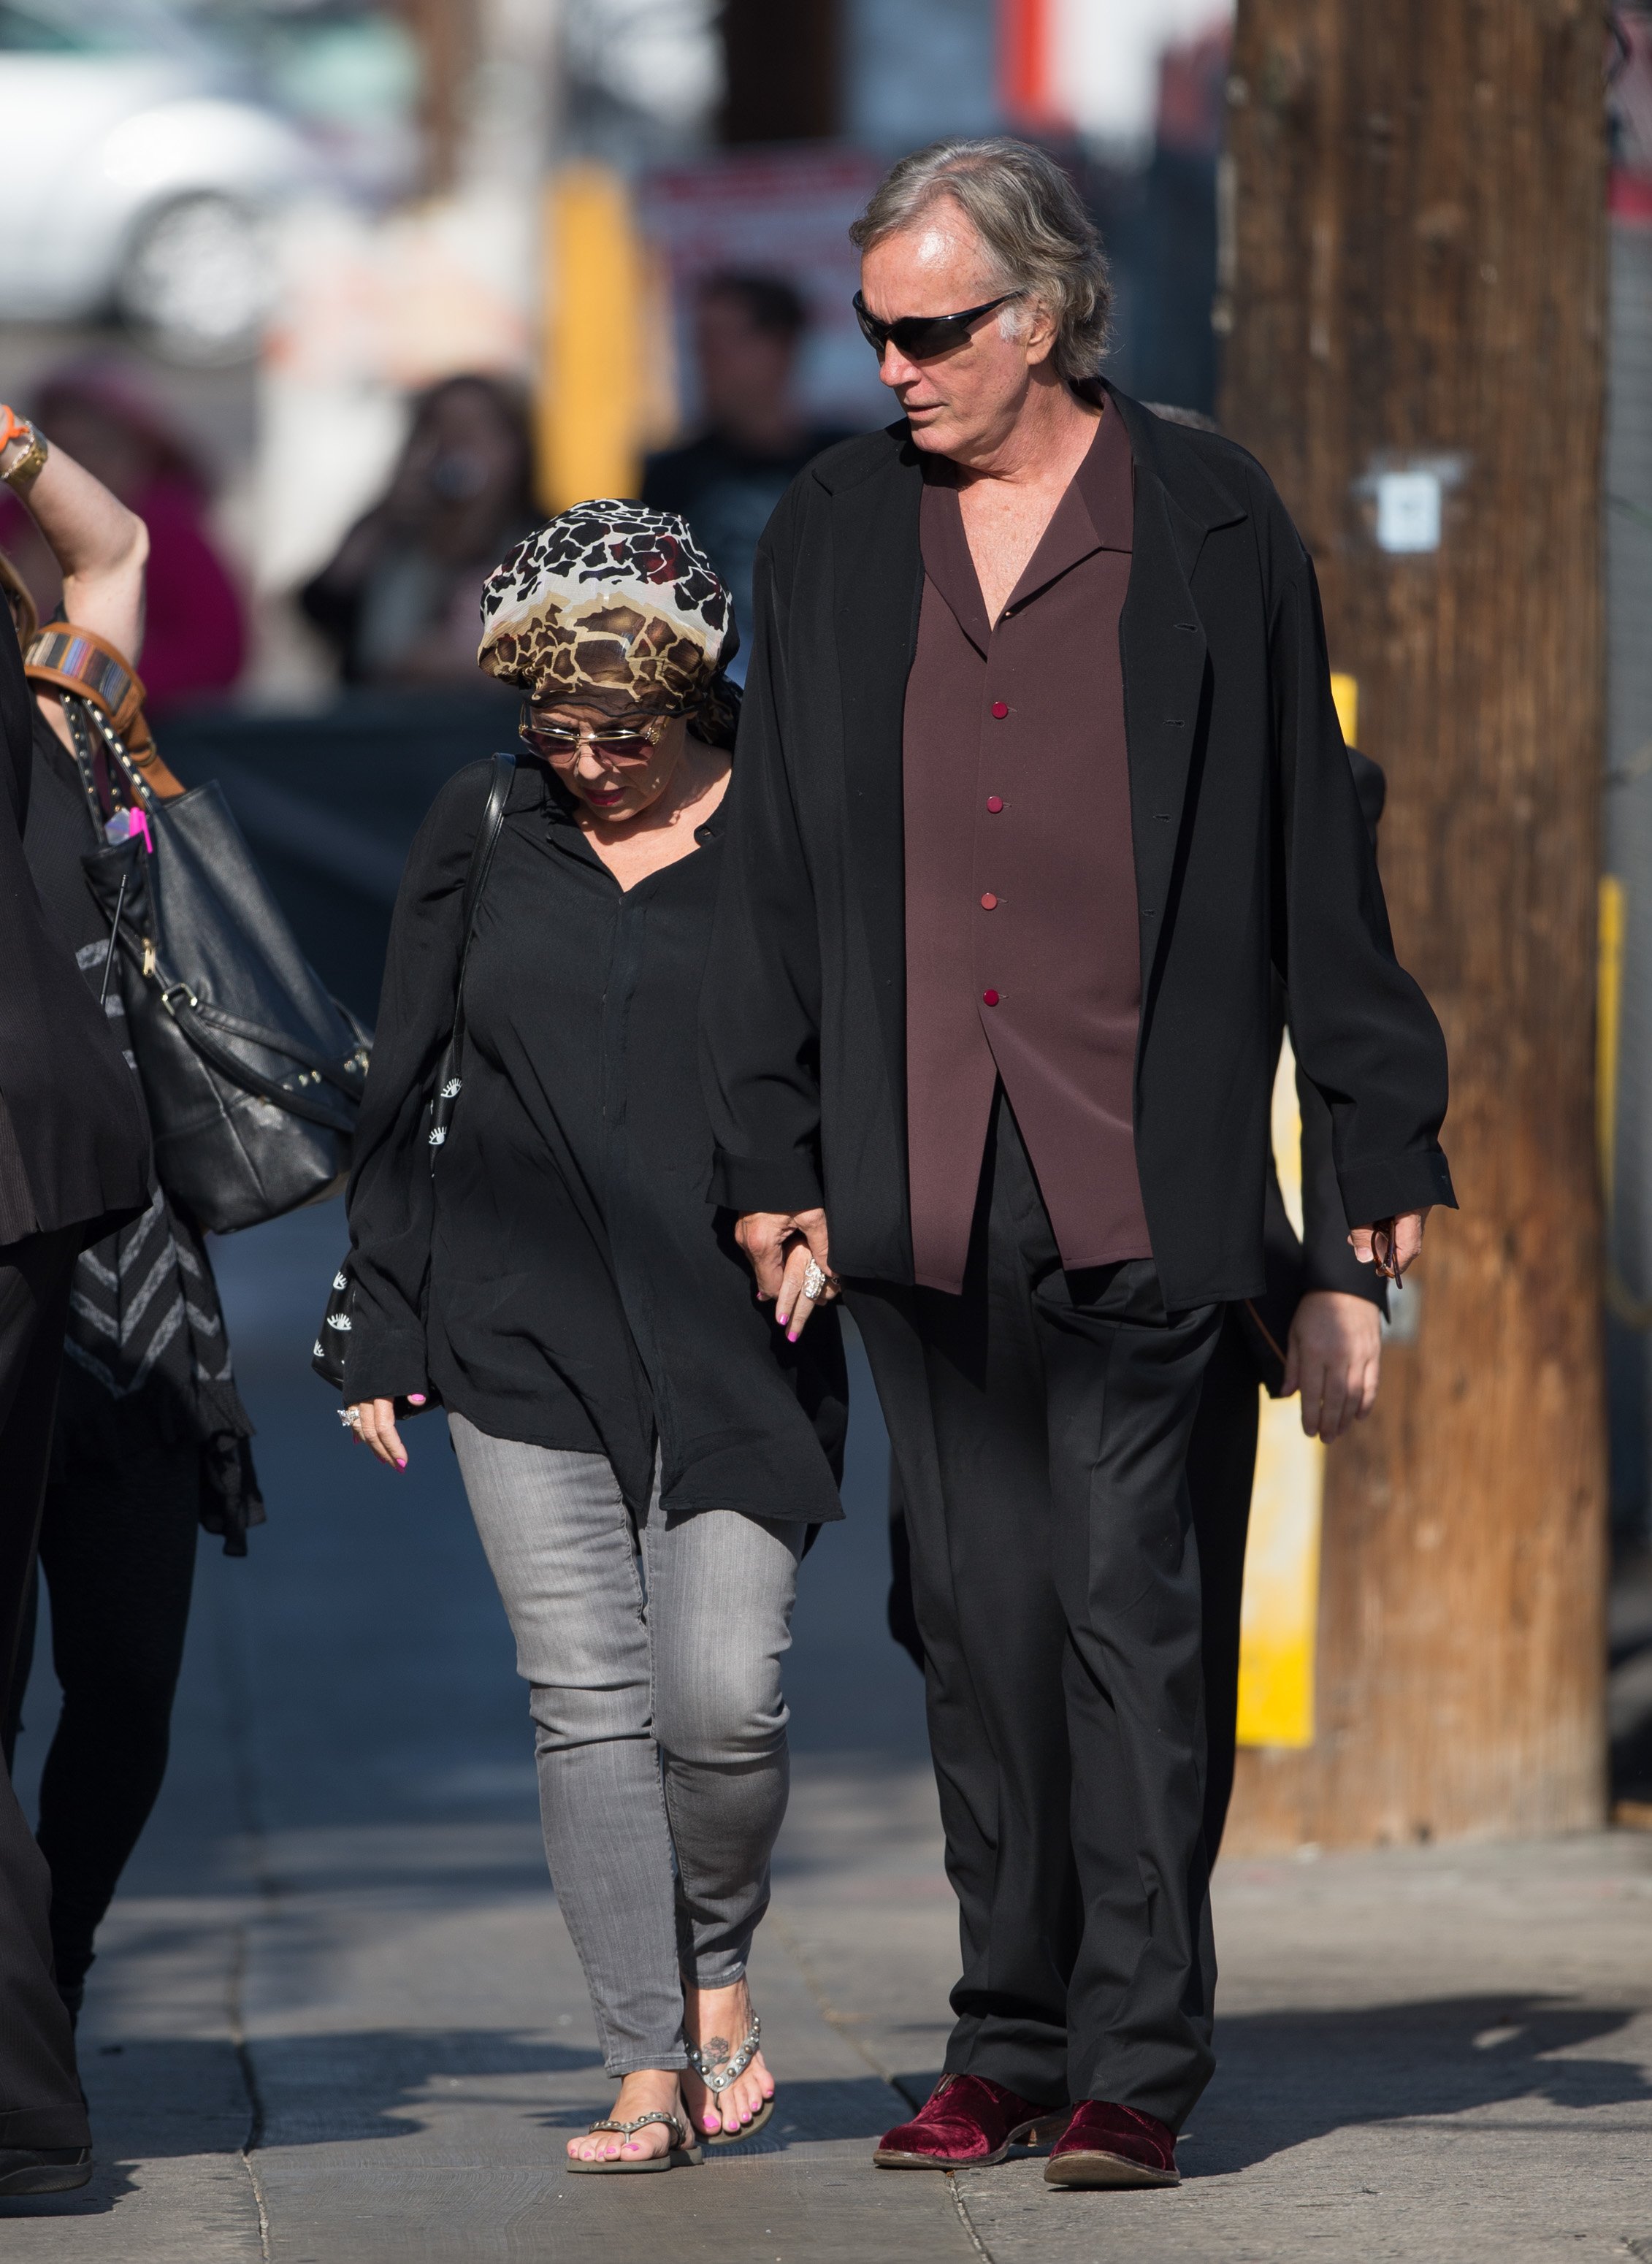 Roseanne Barr and Johnny Argent are seen in Hollywood on June 24, 2014 in Los Angeles, California | Source: Getty Images